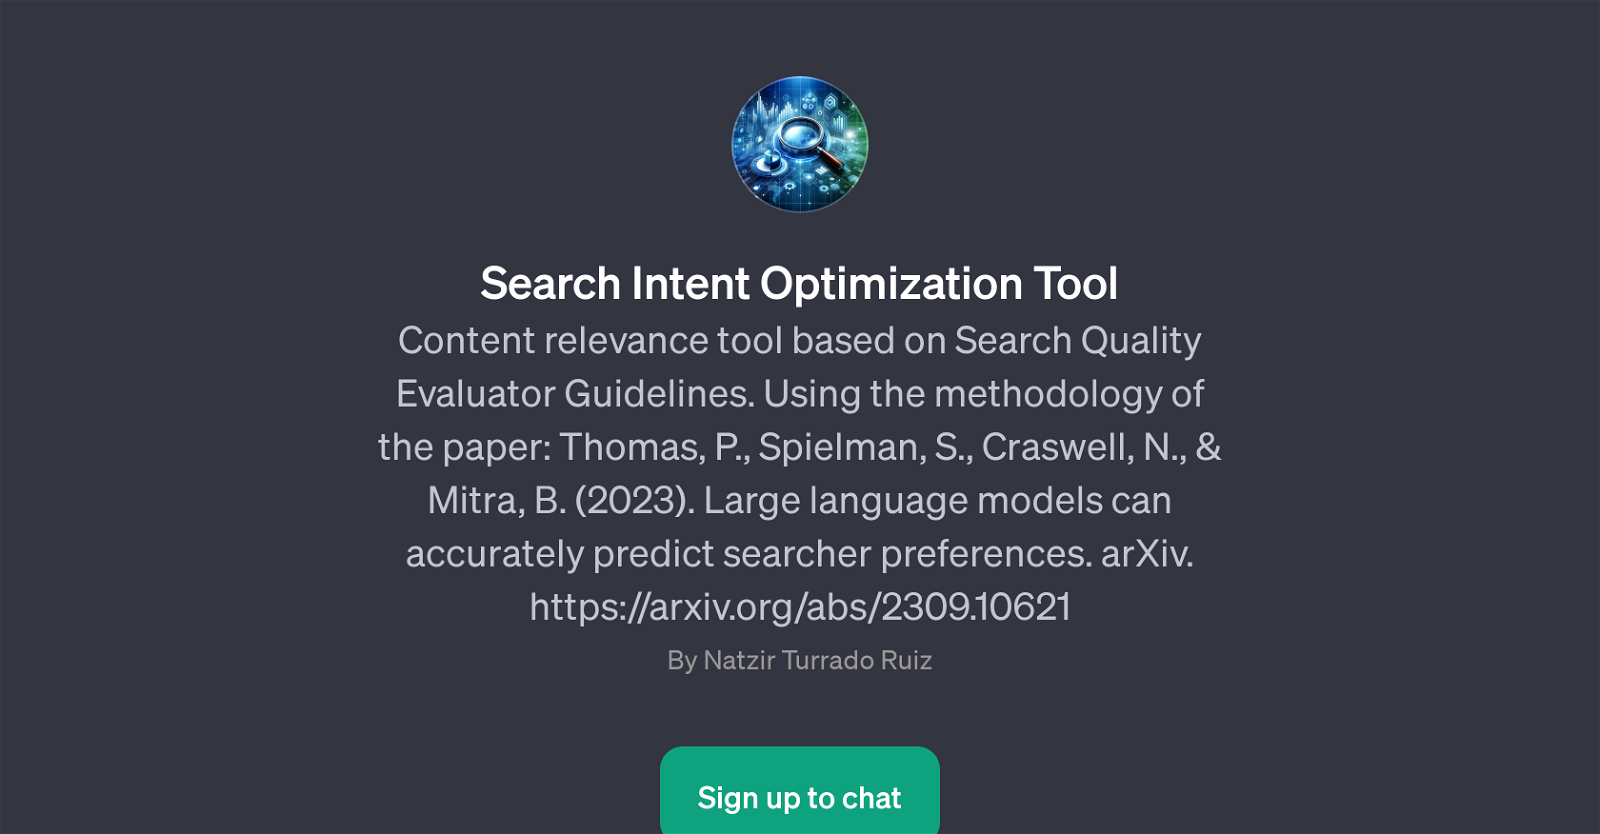 Search Intent Optimization Tool website